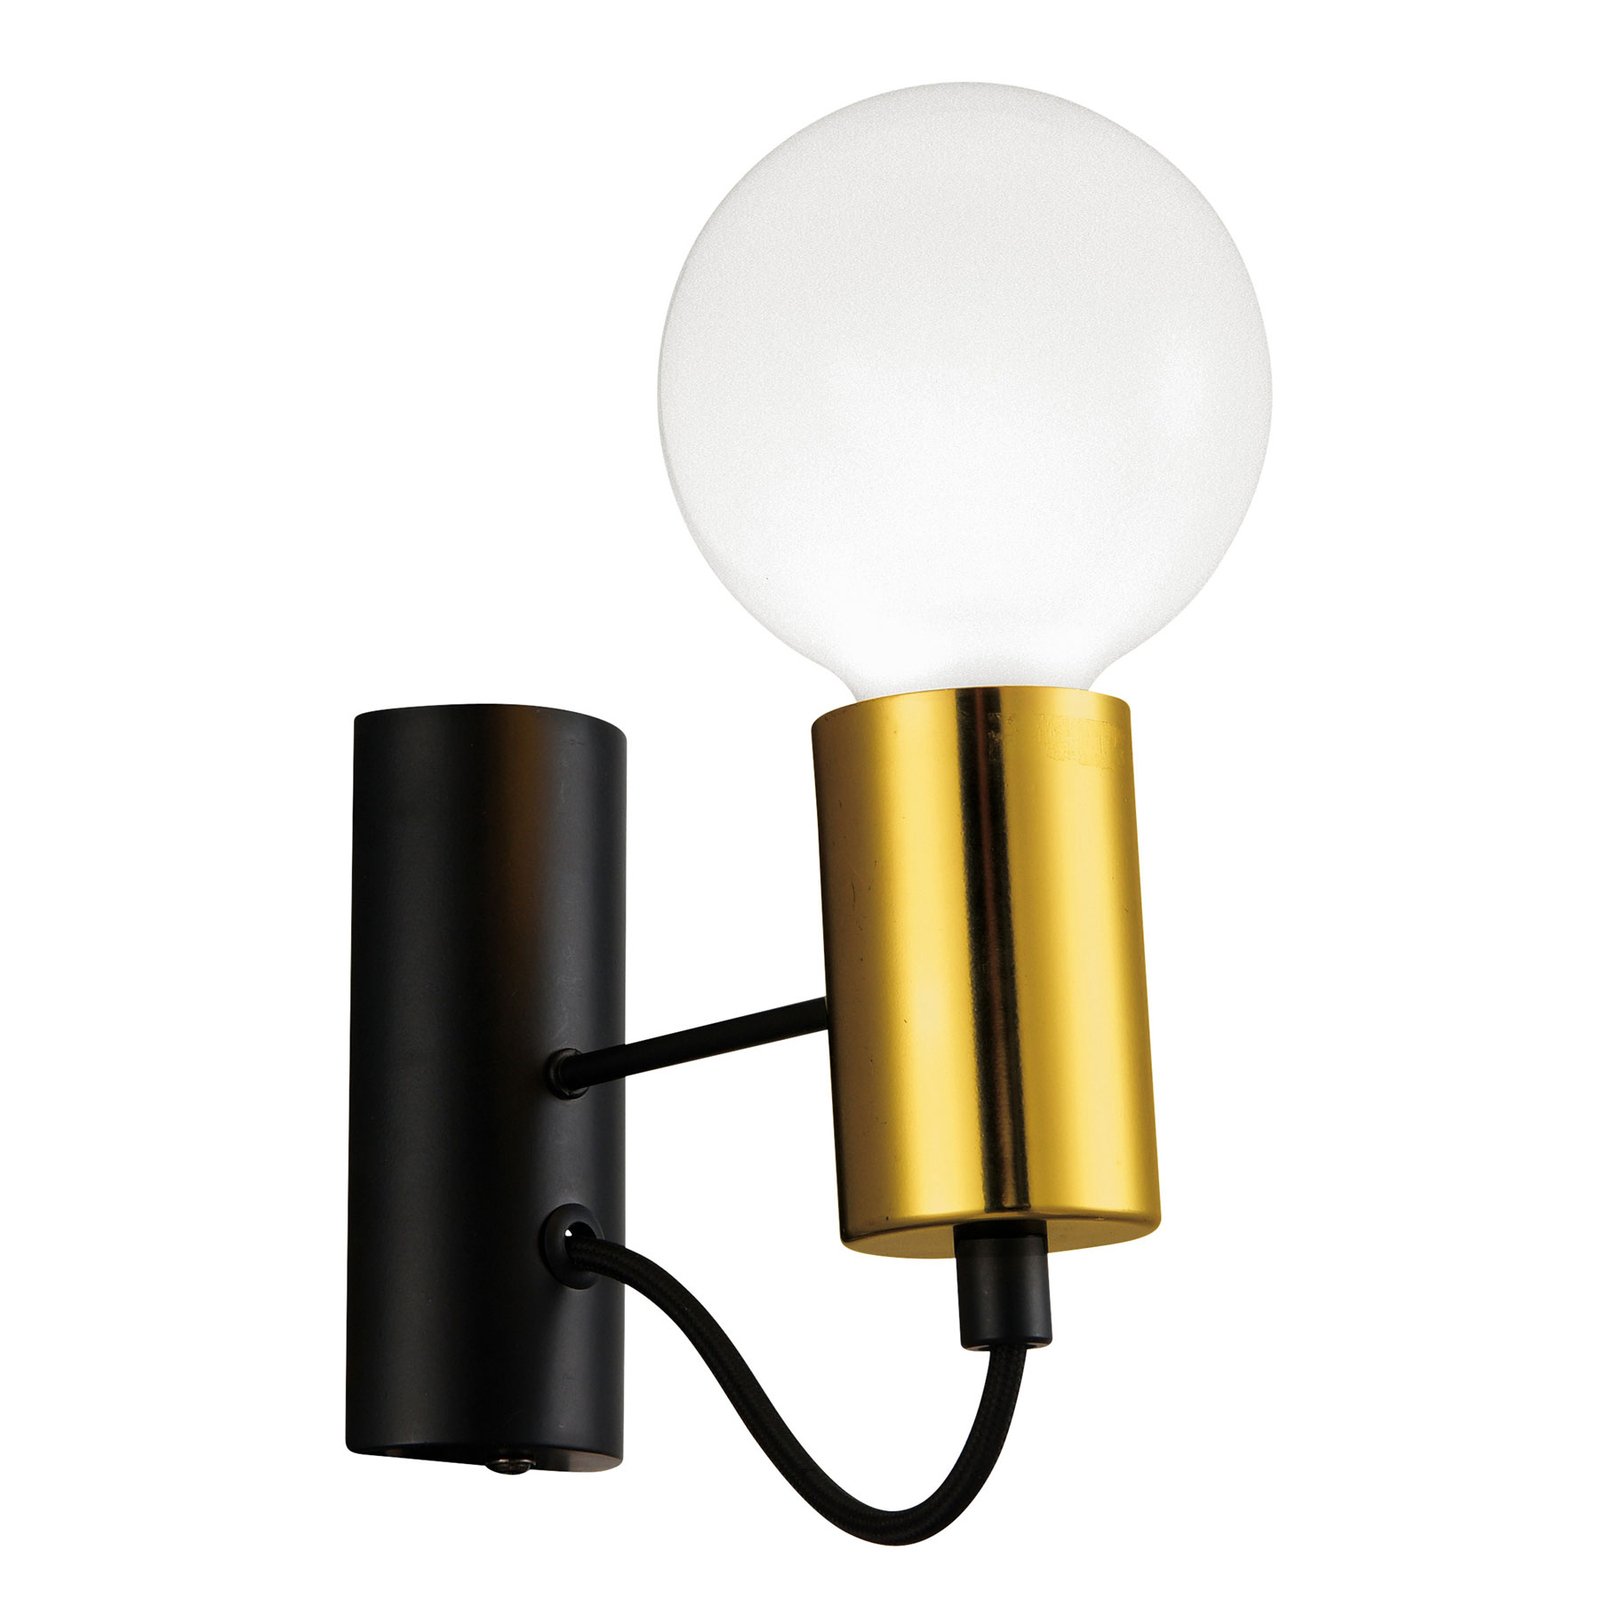 Volter wall light, one-bulb